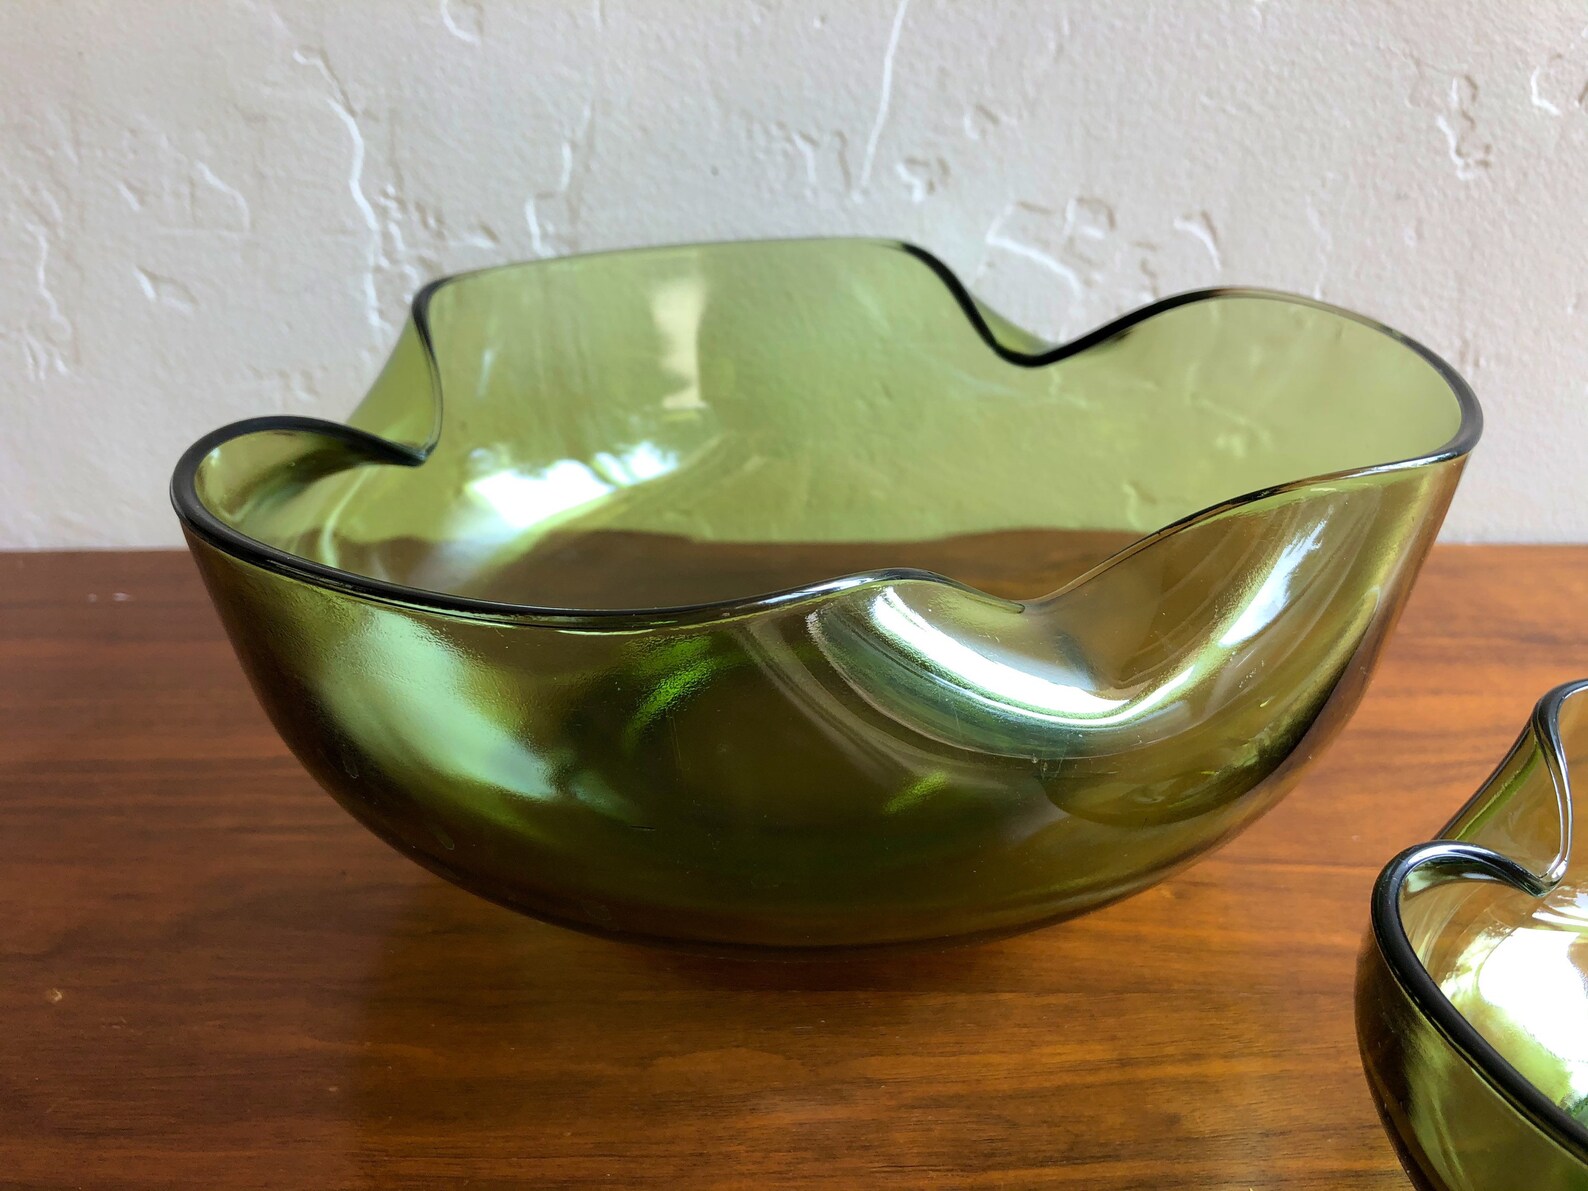 1970's Avocado Green Glass Chip and Dip Bowl Set / Vintage | Etsy